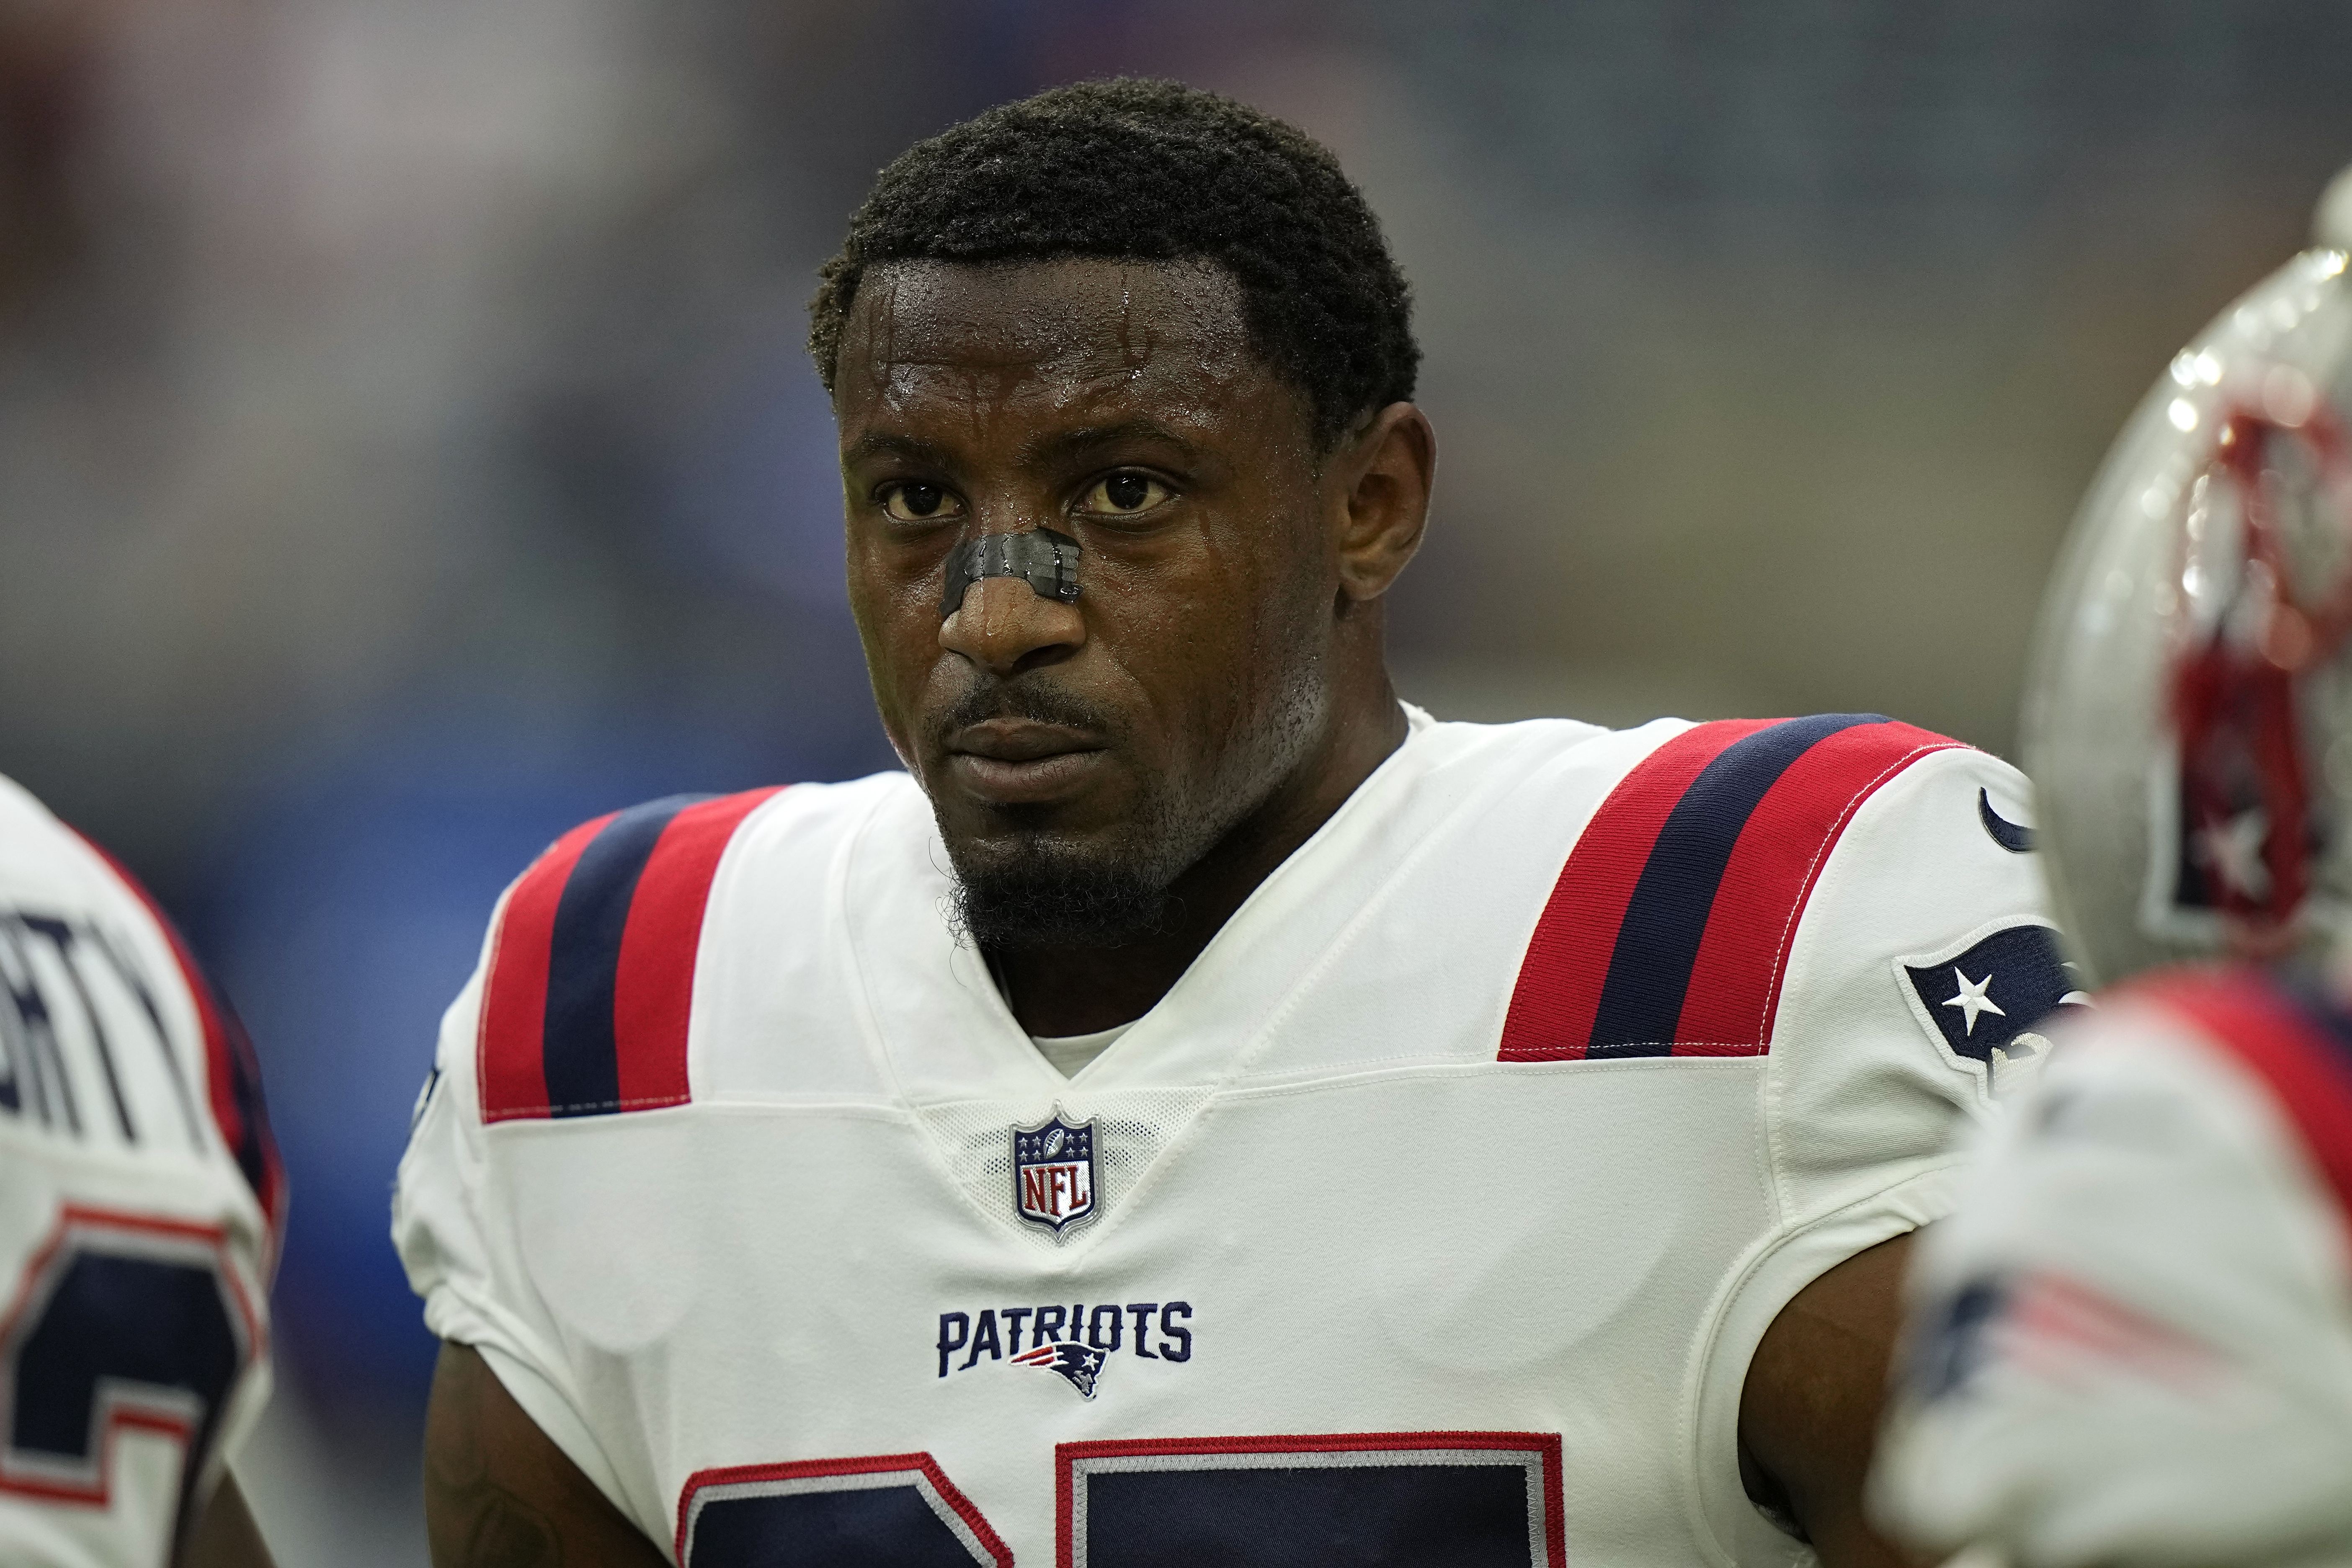 By trading for J.C. Jackson, Patriots refuse to give up